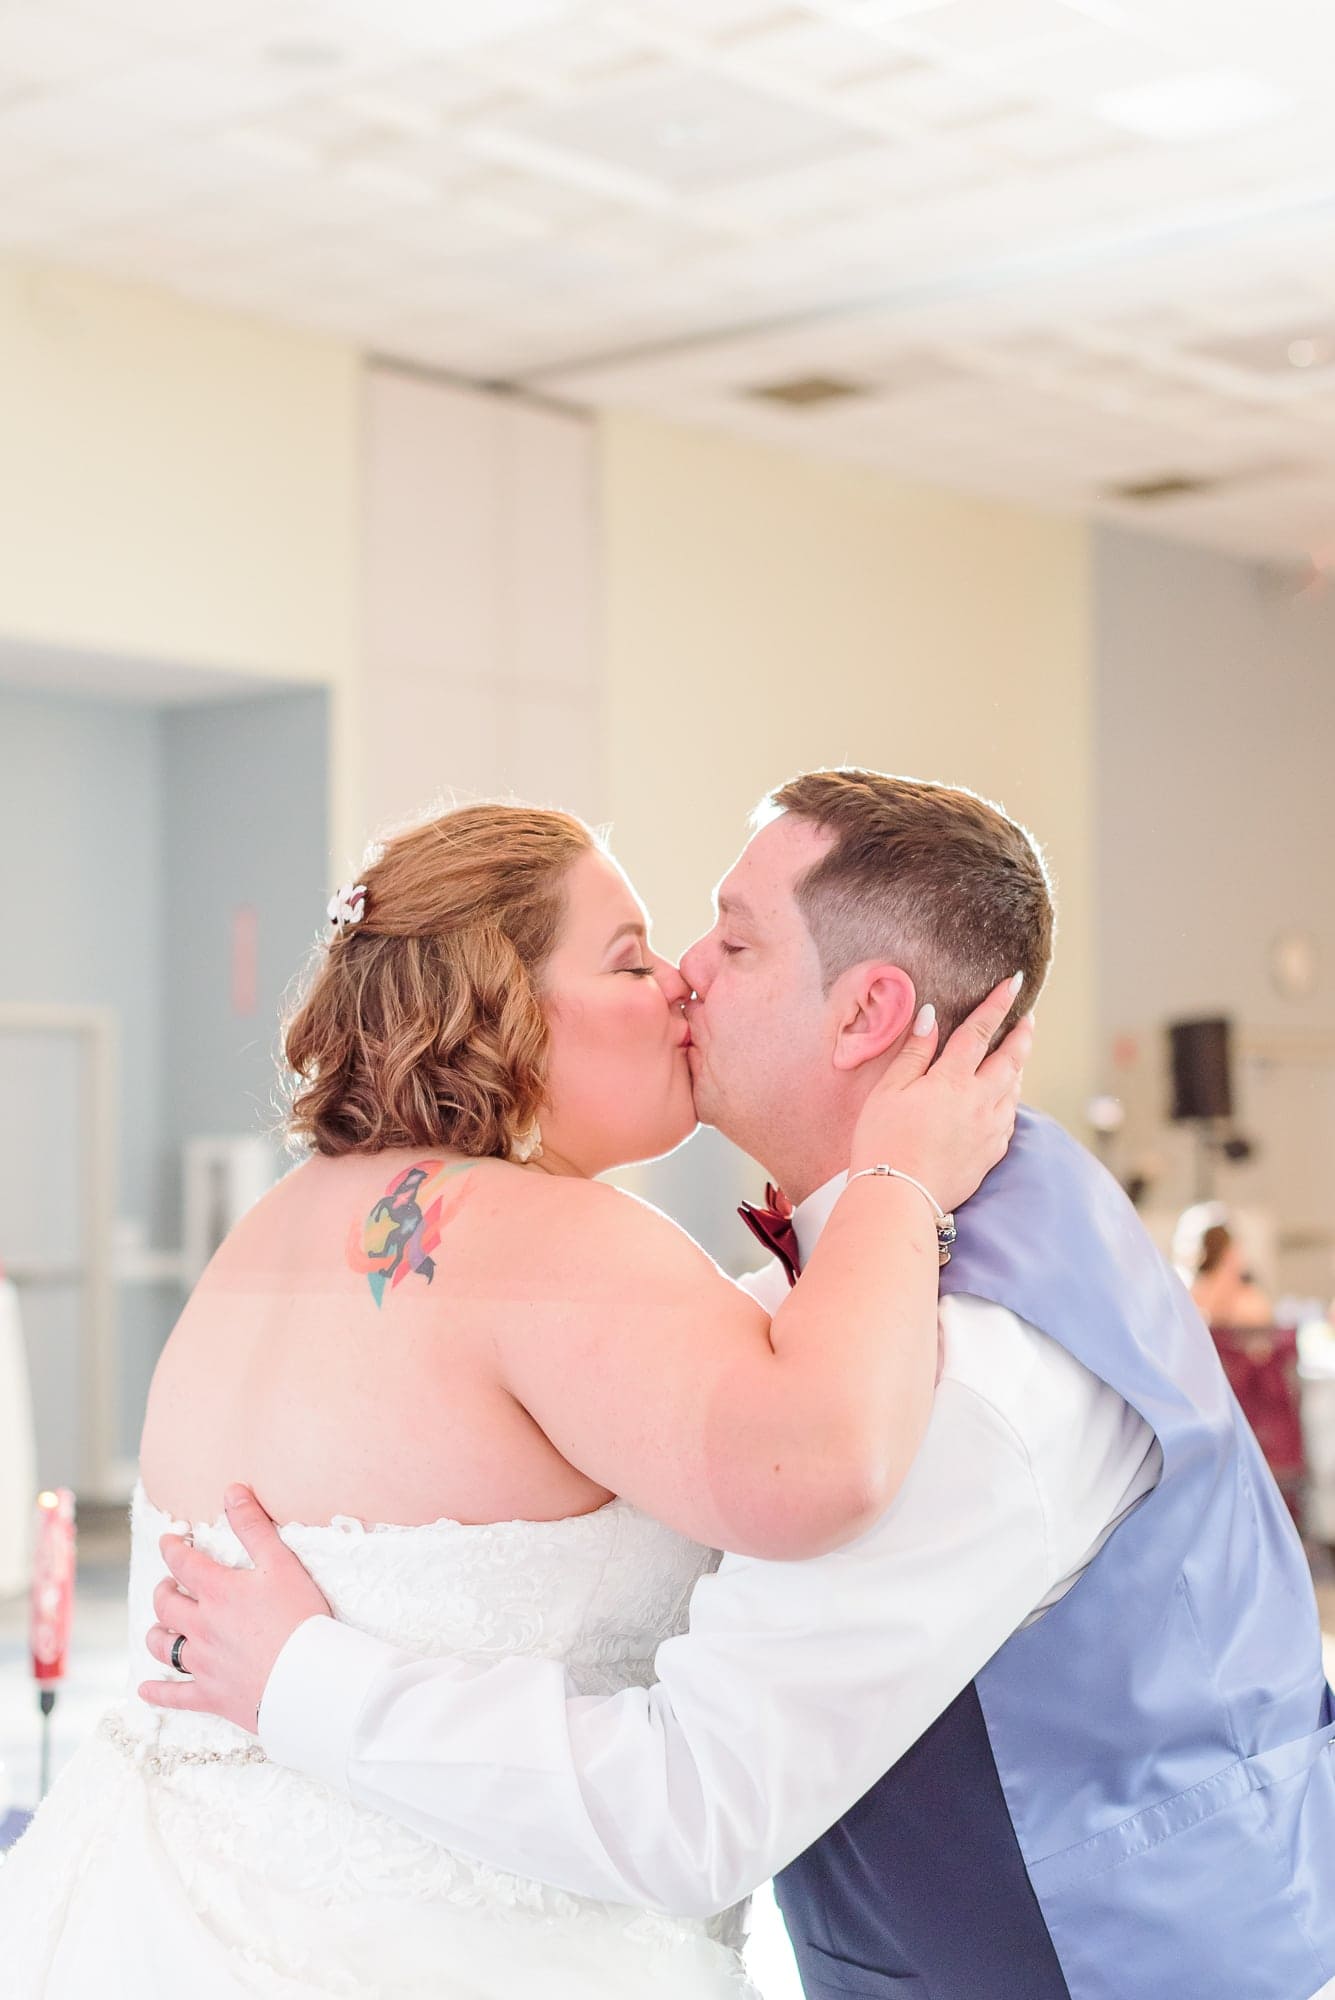 Yessie and Jeff kiss in the reception hall at the Charles Mack Citizen Center in Mooresville.